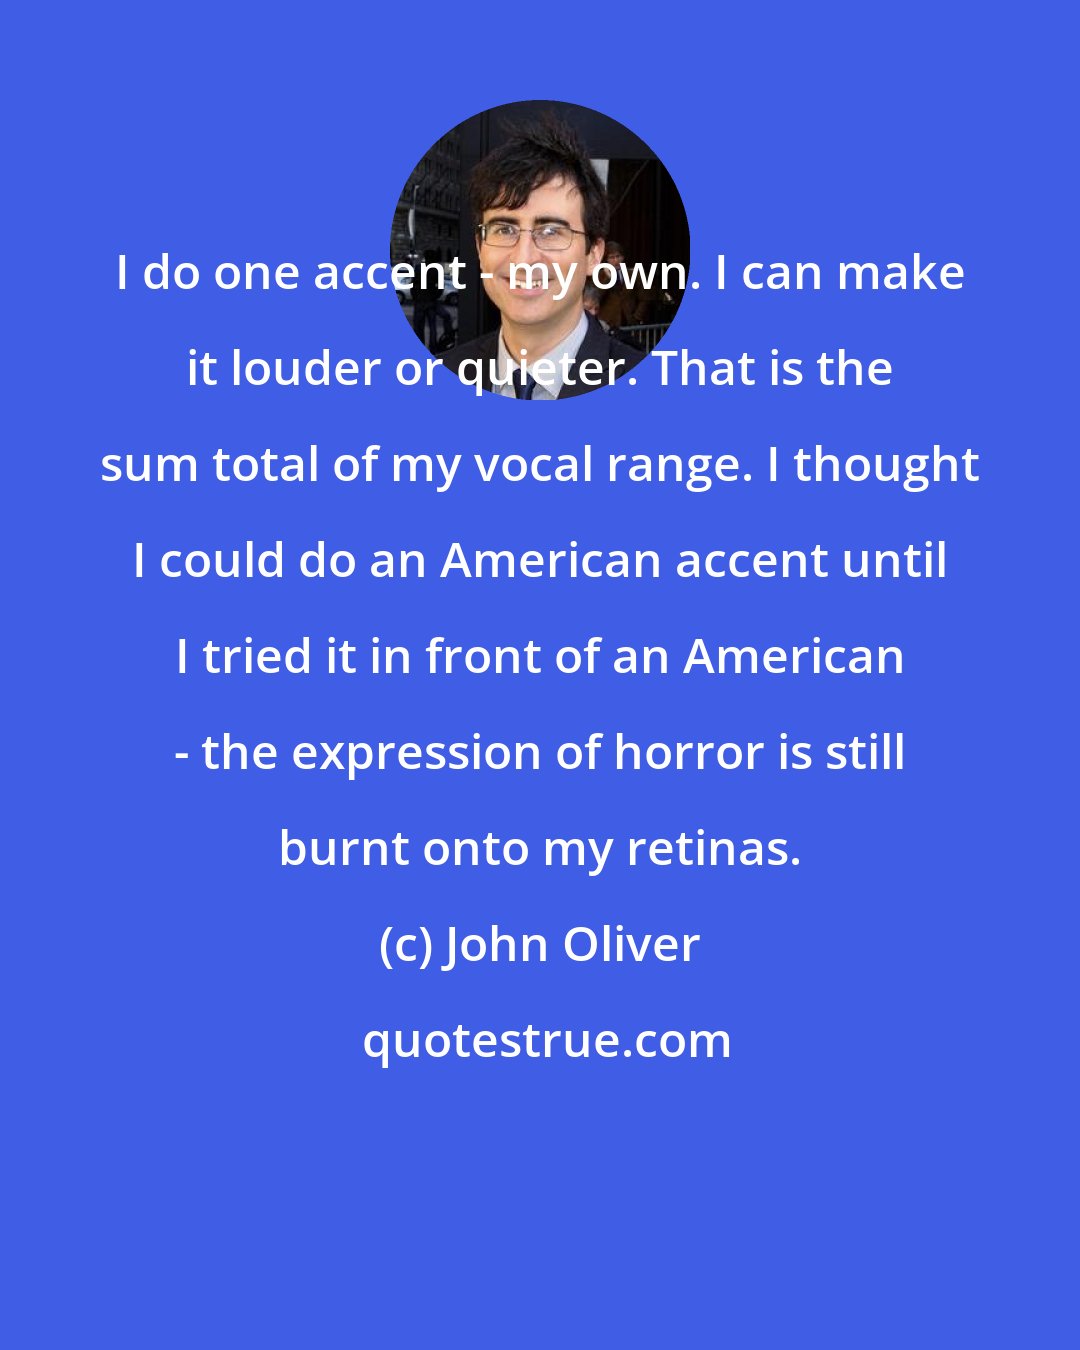 John Oliver: I do one accent - my own. I can make it louder or quieter. That is the sum total of my vocal range. I thought I could do an American accent until I tried it in front of an American - the expression of horror is still burnt onto my retinas.